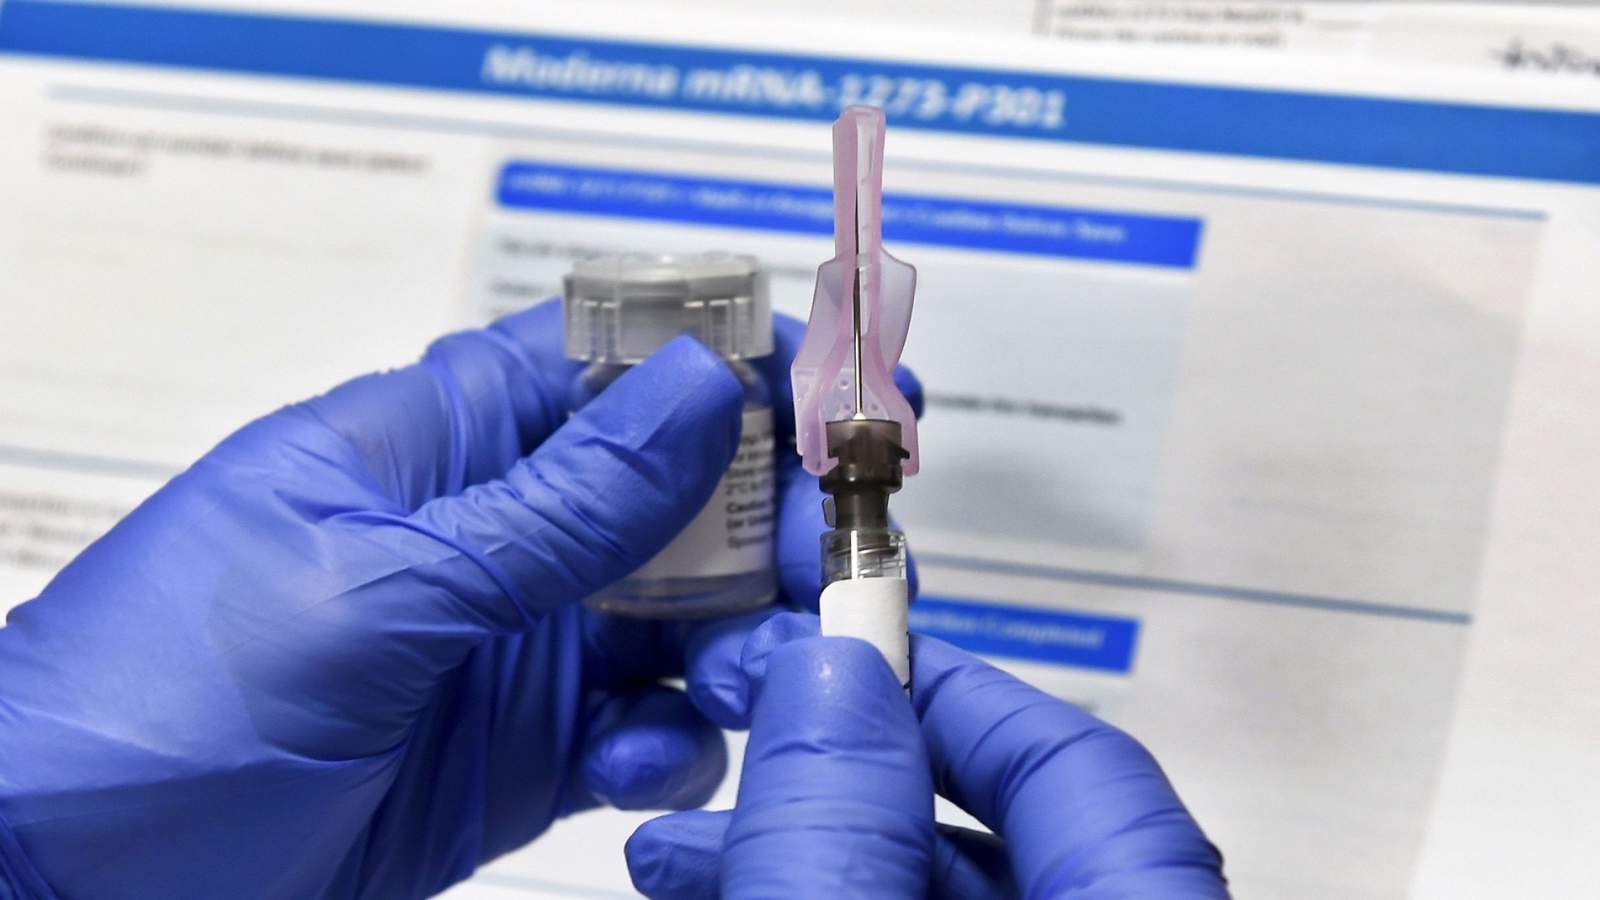 Morning Briefing Dec. 11, 2020: Michigan plans for vaccine (what’s next), federal COVID aid package status, weekend weather update